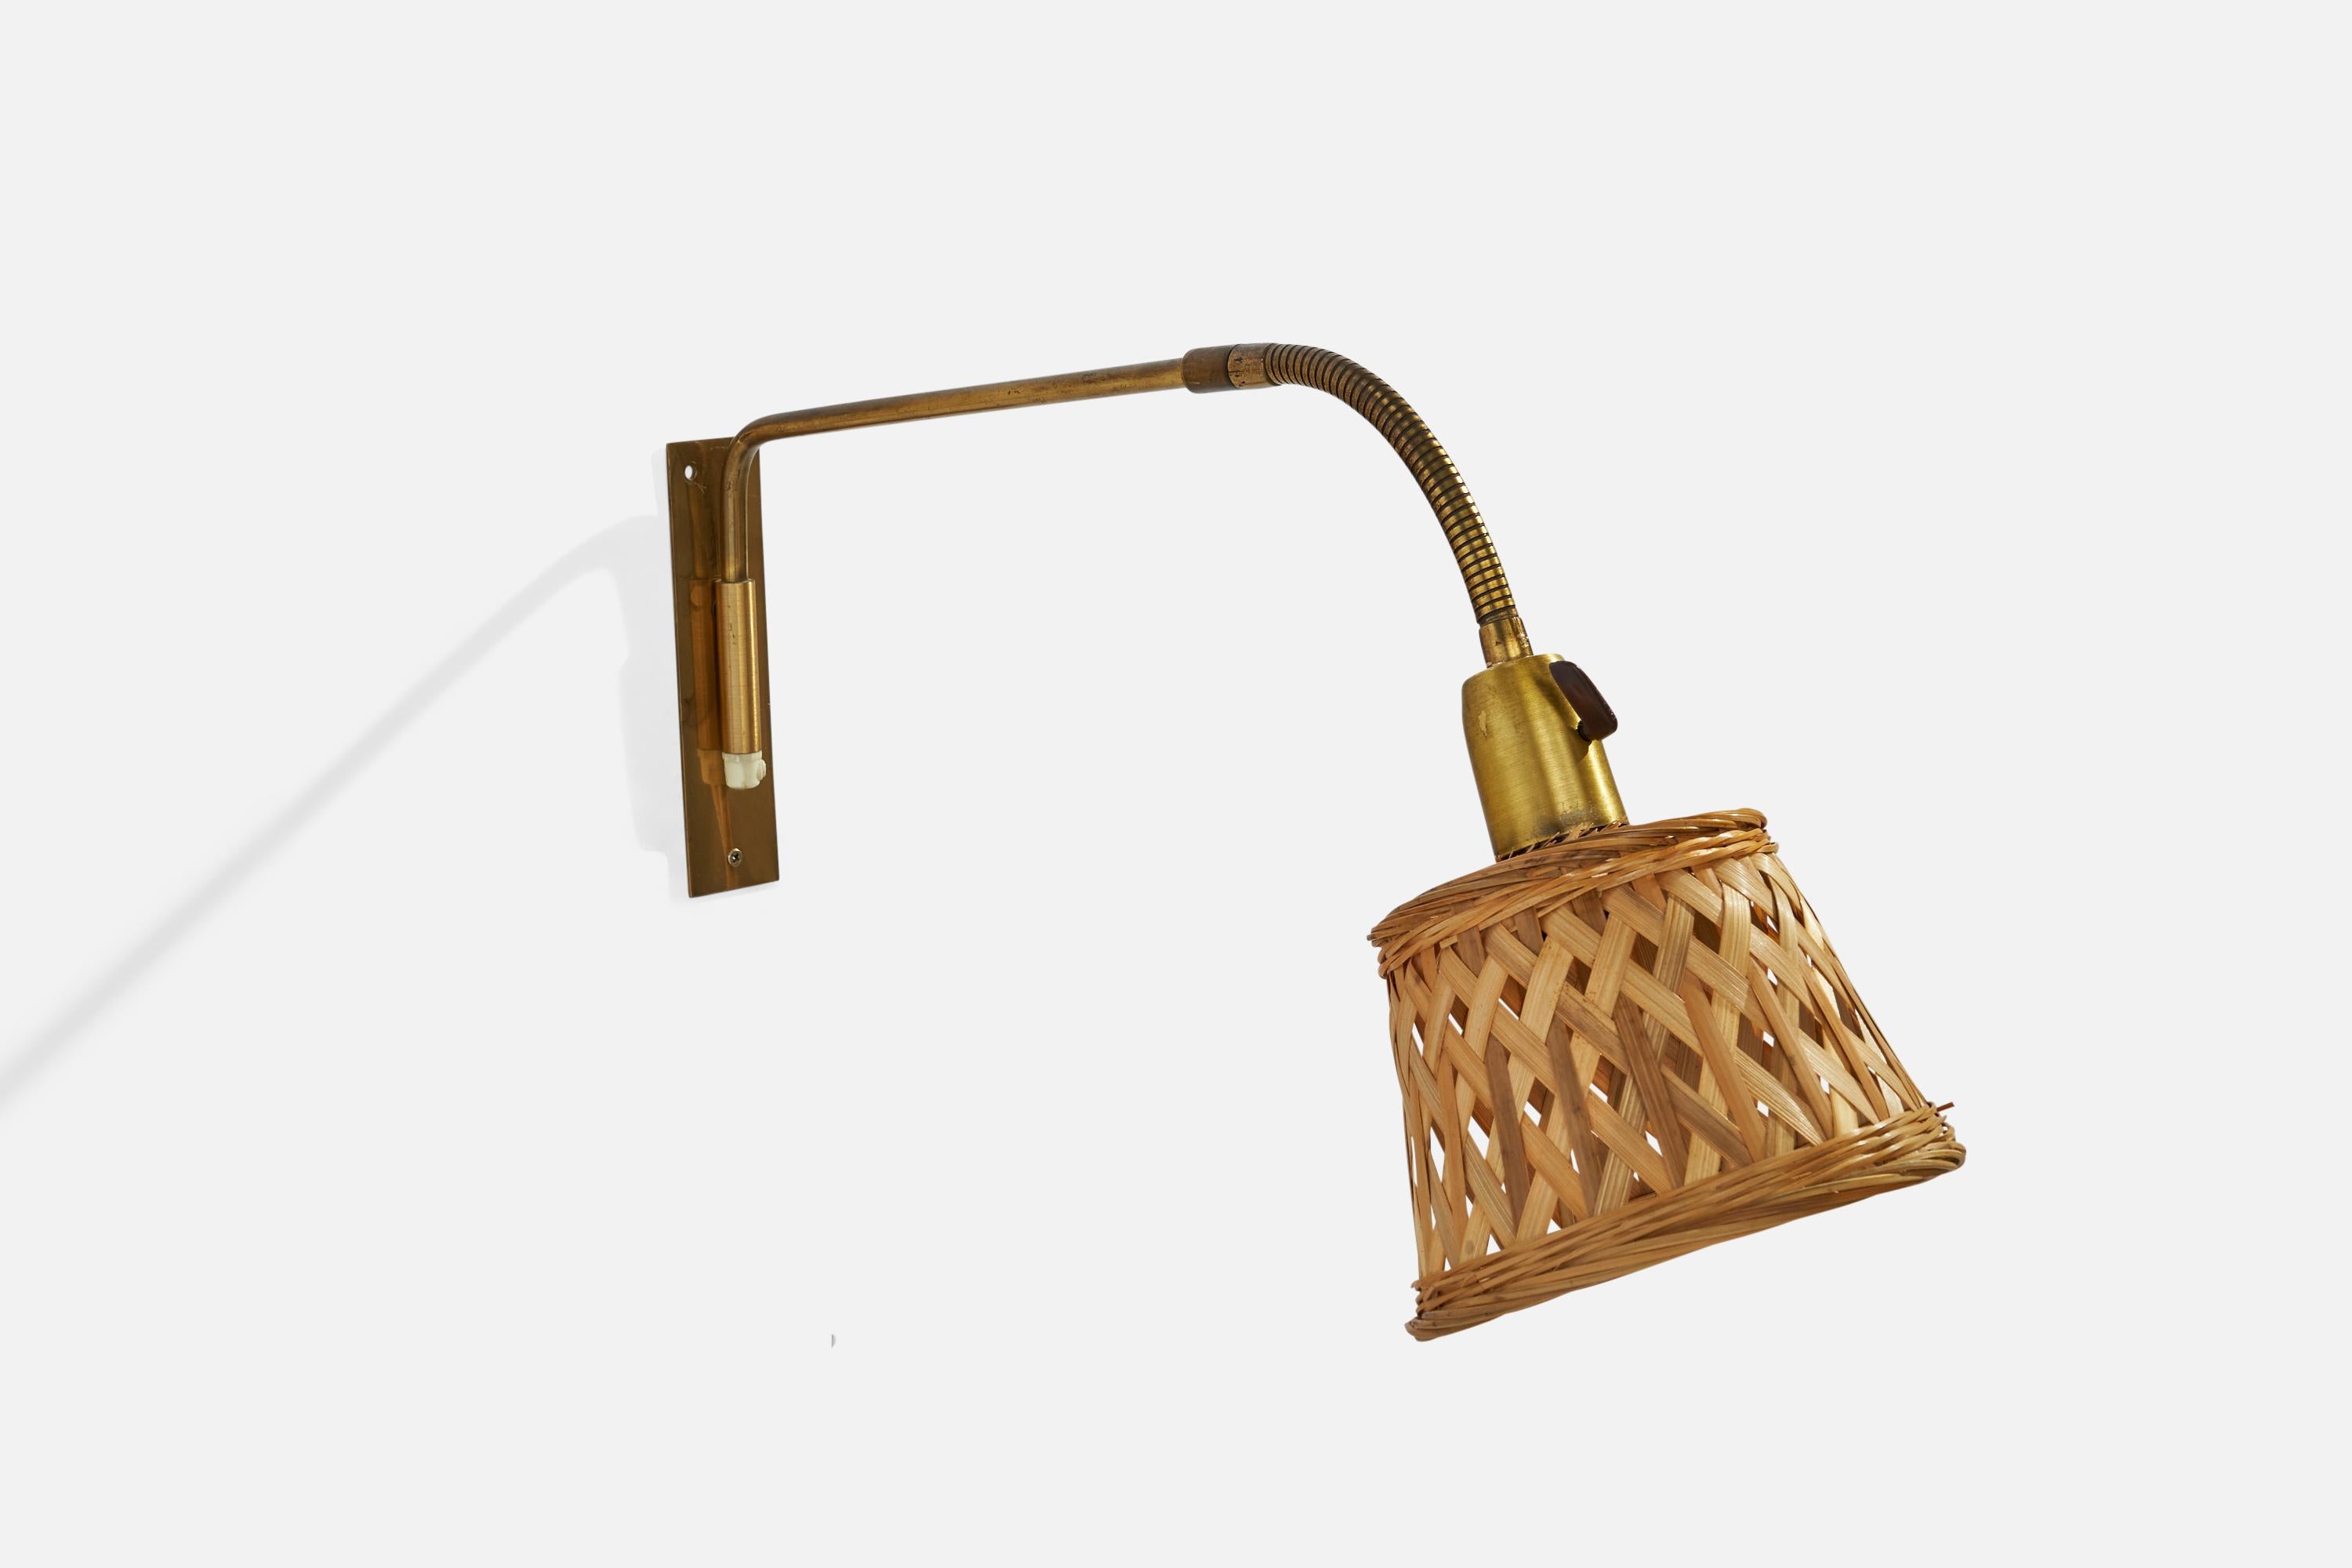 An adjustable brass and rattan wall light designed and produced by E.S. Horn, Aalestrup, Denmark, 1950s.

Overall Dimensions (inches): 7.25” H x 16”  W x 19” D
Back Plate Dimensions (inches): 6.25”  H x 1.5” W x .25” D
Bulb Specifications: E-26